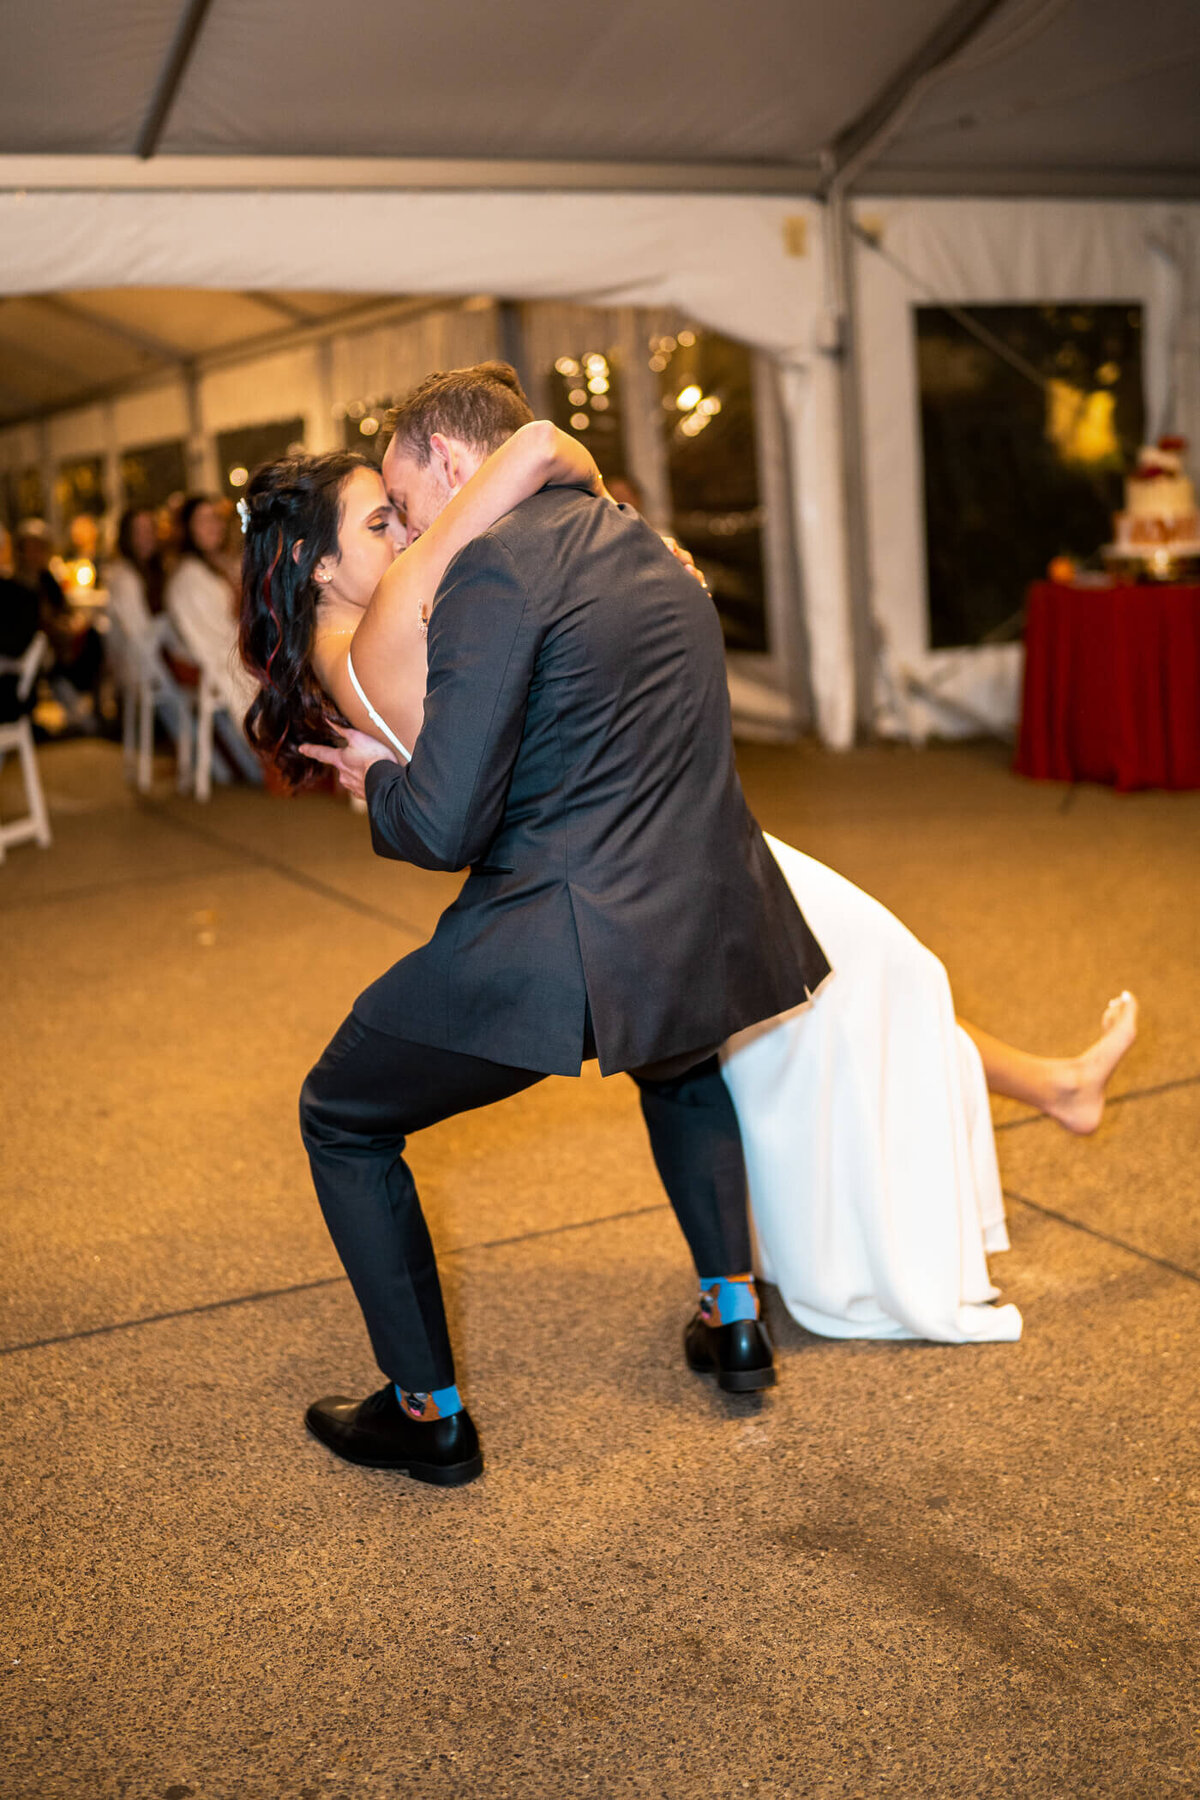 Bride and groom share a dip kiss during their first dance at a wedding venue in pittsburgh PA. Captured by Pittsburgh Wedding Photographer Michael Fricke